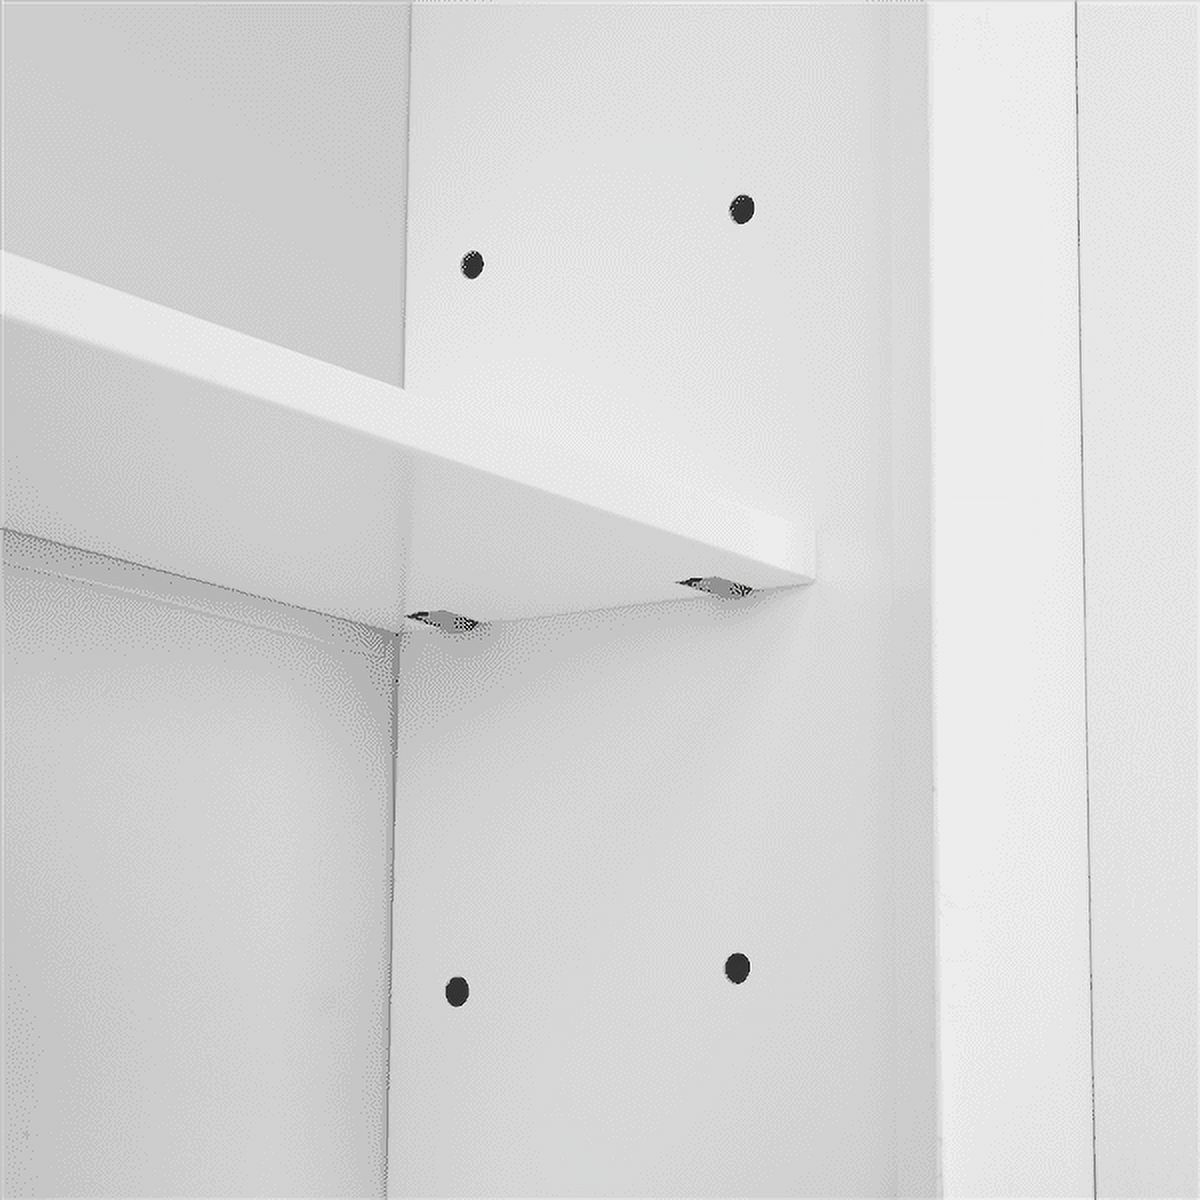 Topeakmart Wall Mount Cabinet with Double Mirror Doors Kitchen Storage Cabinet White - image 5 of 6